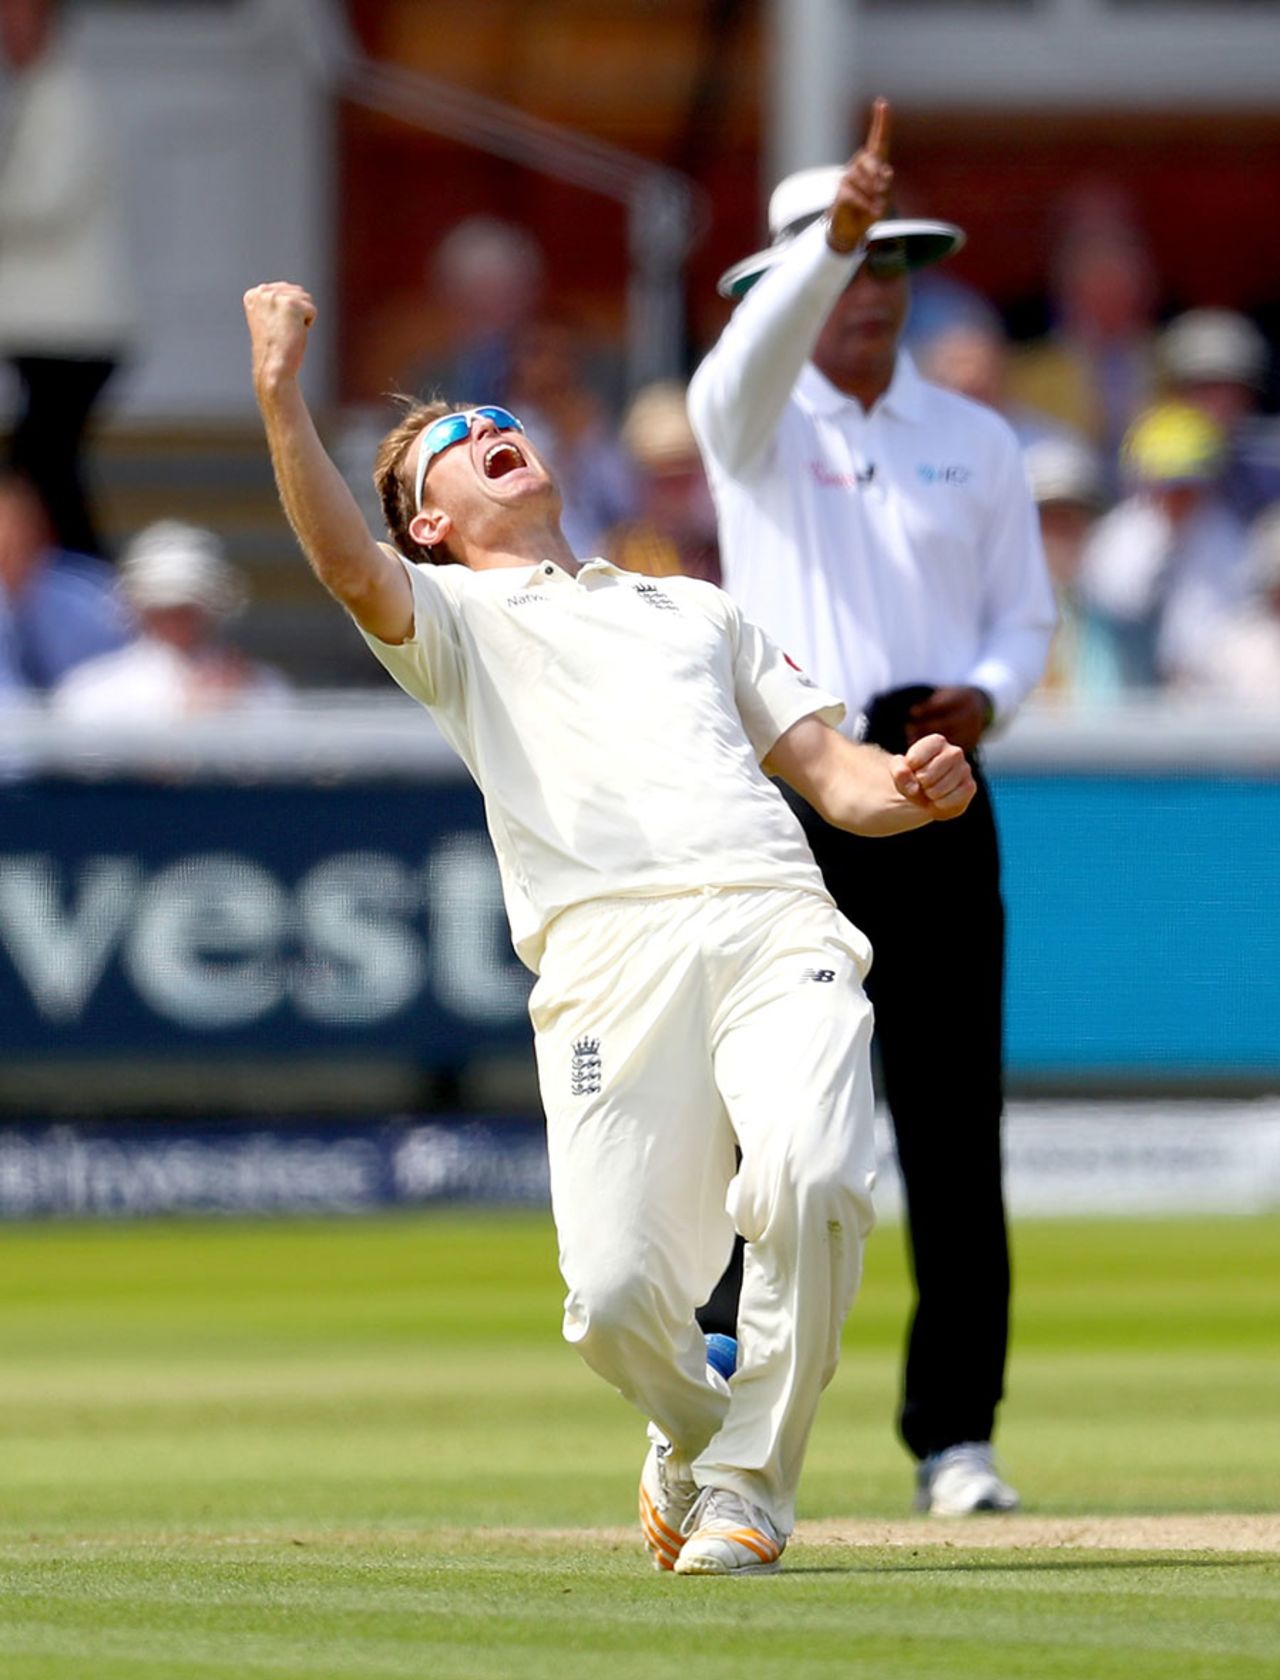 Liam Dawson made England's first breakthrough of the third day, England v South Africa, 1st Investec Test, Lord's, 3rd day, July 8, 2017